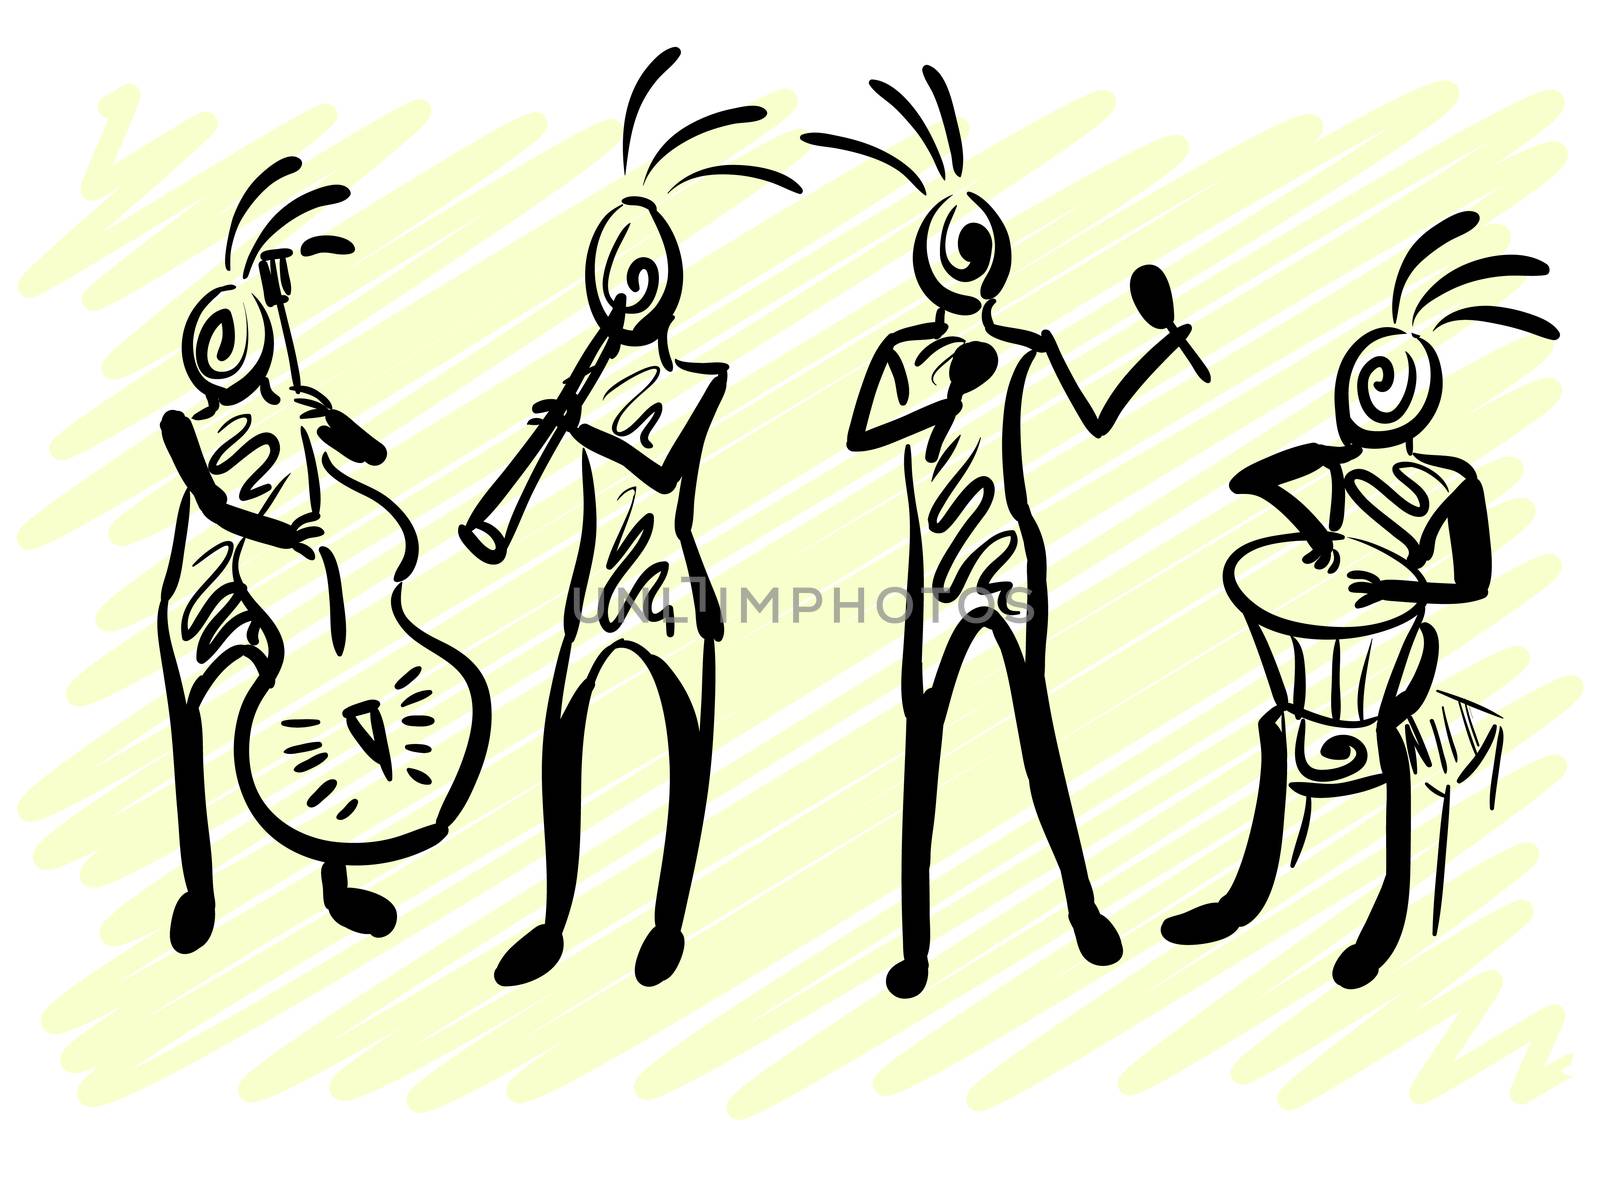 Abstract mysterious musicians. Corporate identity sketch. by Adamchuk